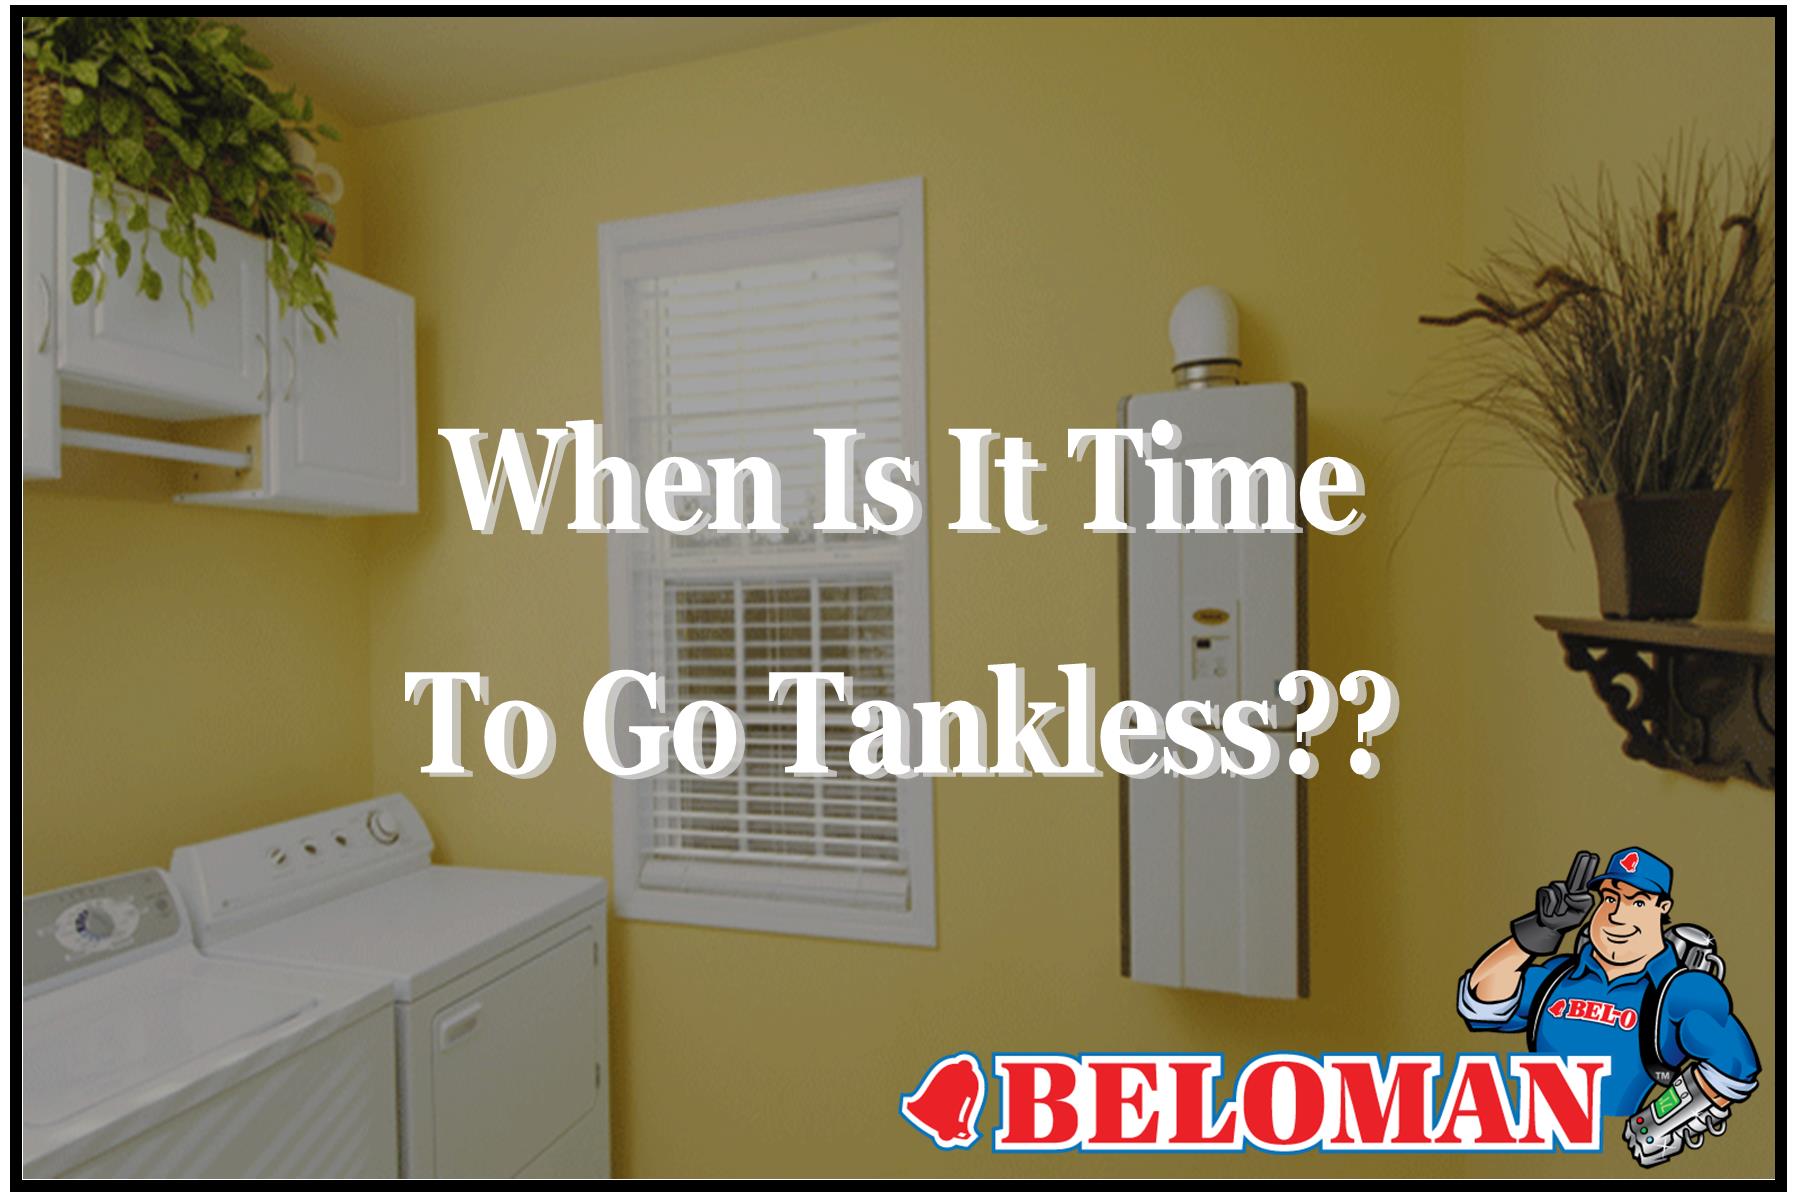 b-84-time-to-go-tankless